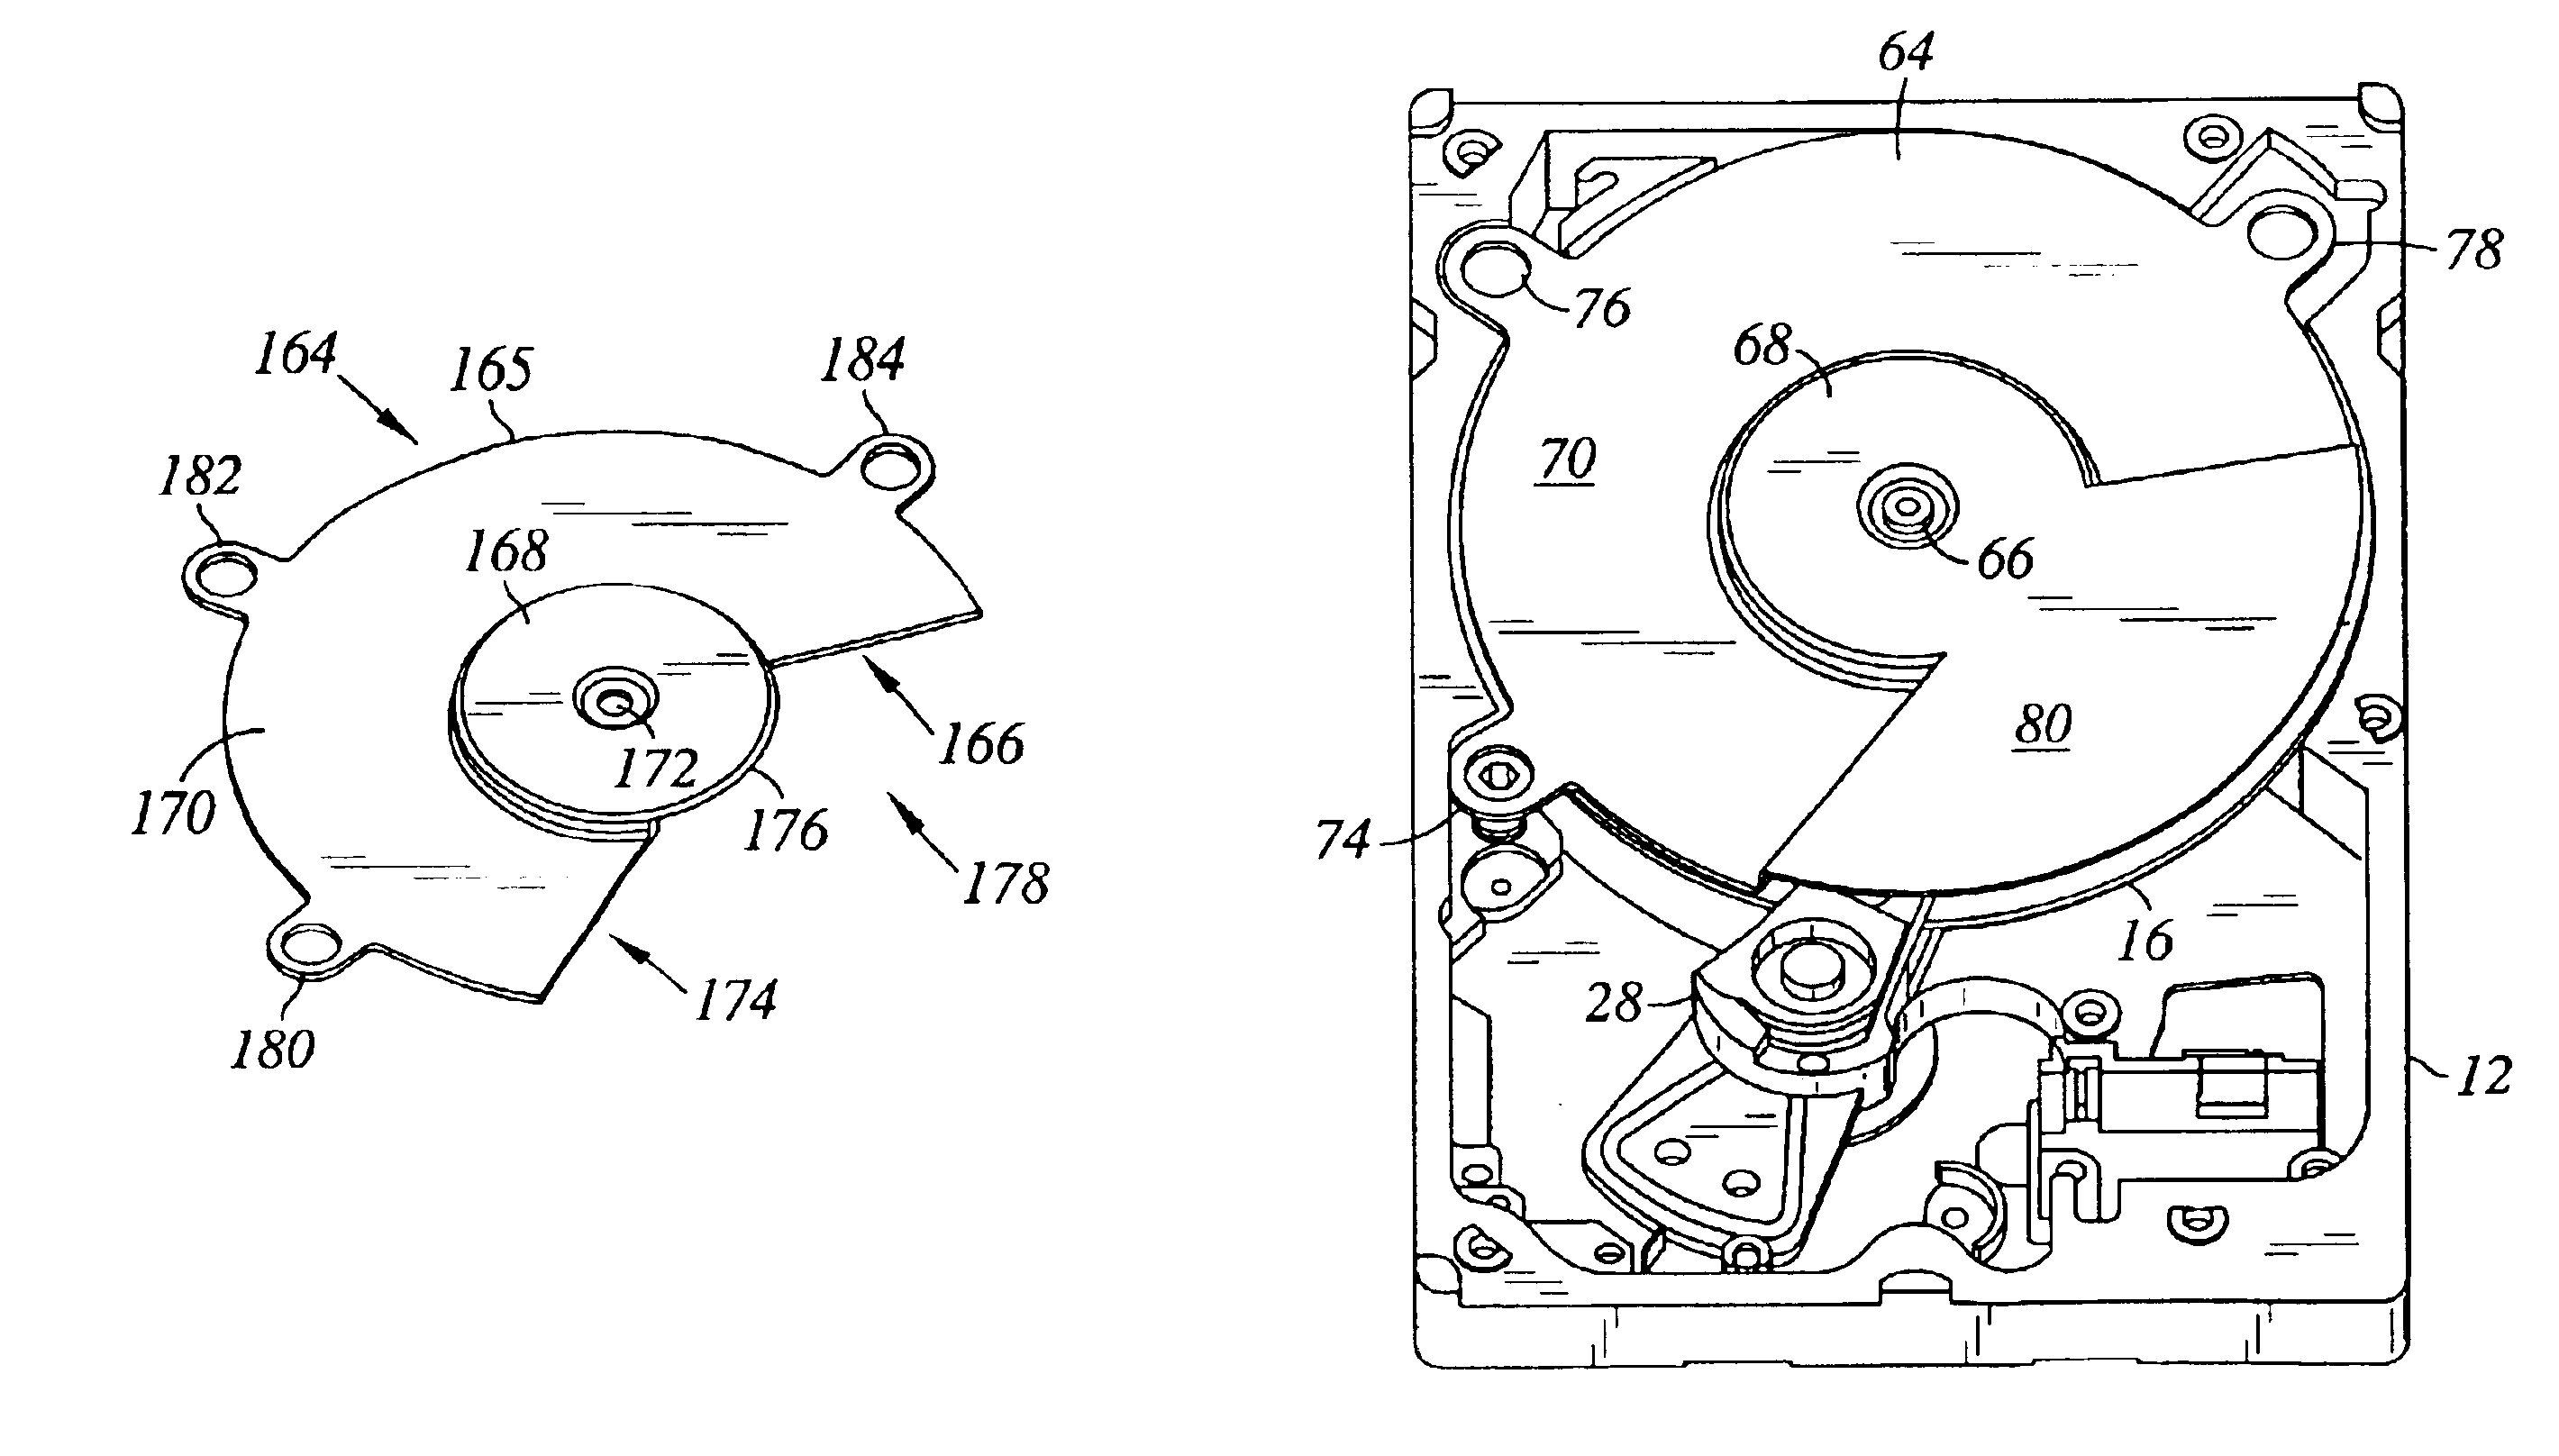 Disk drive having a disk plate body attached to a fixed spindle shaft of a spindle motor